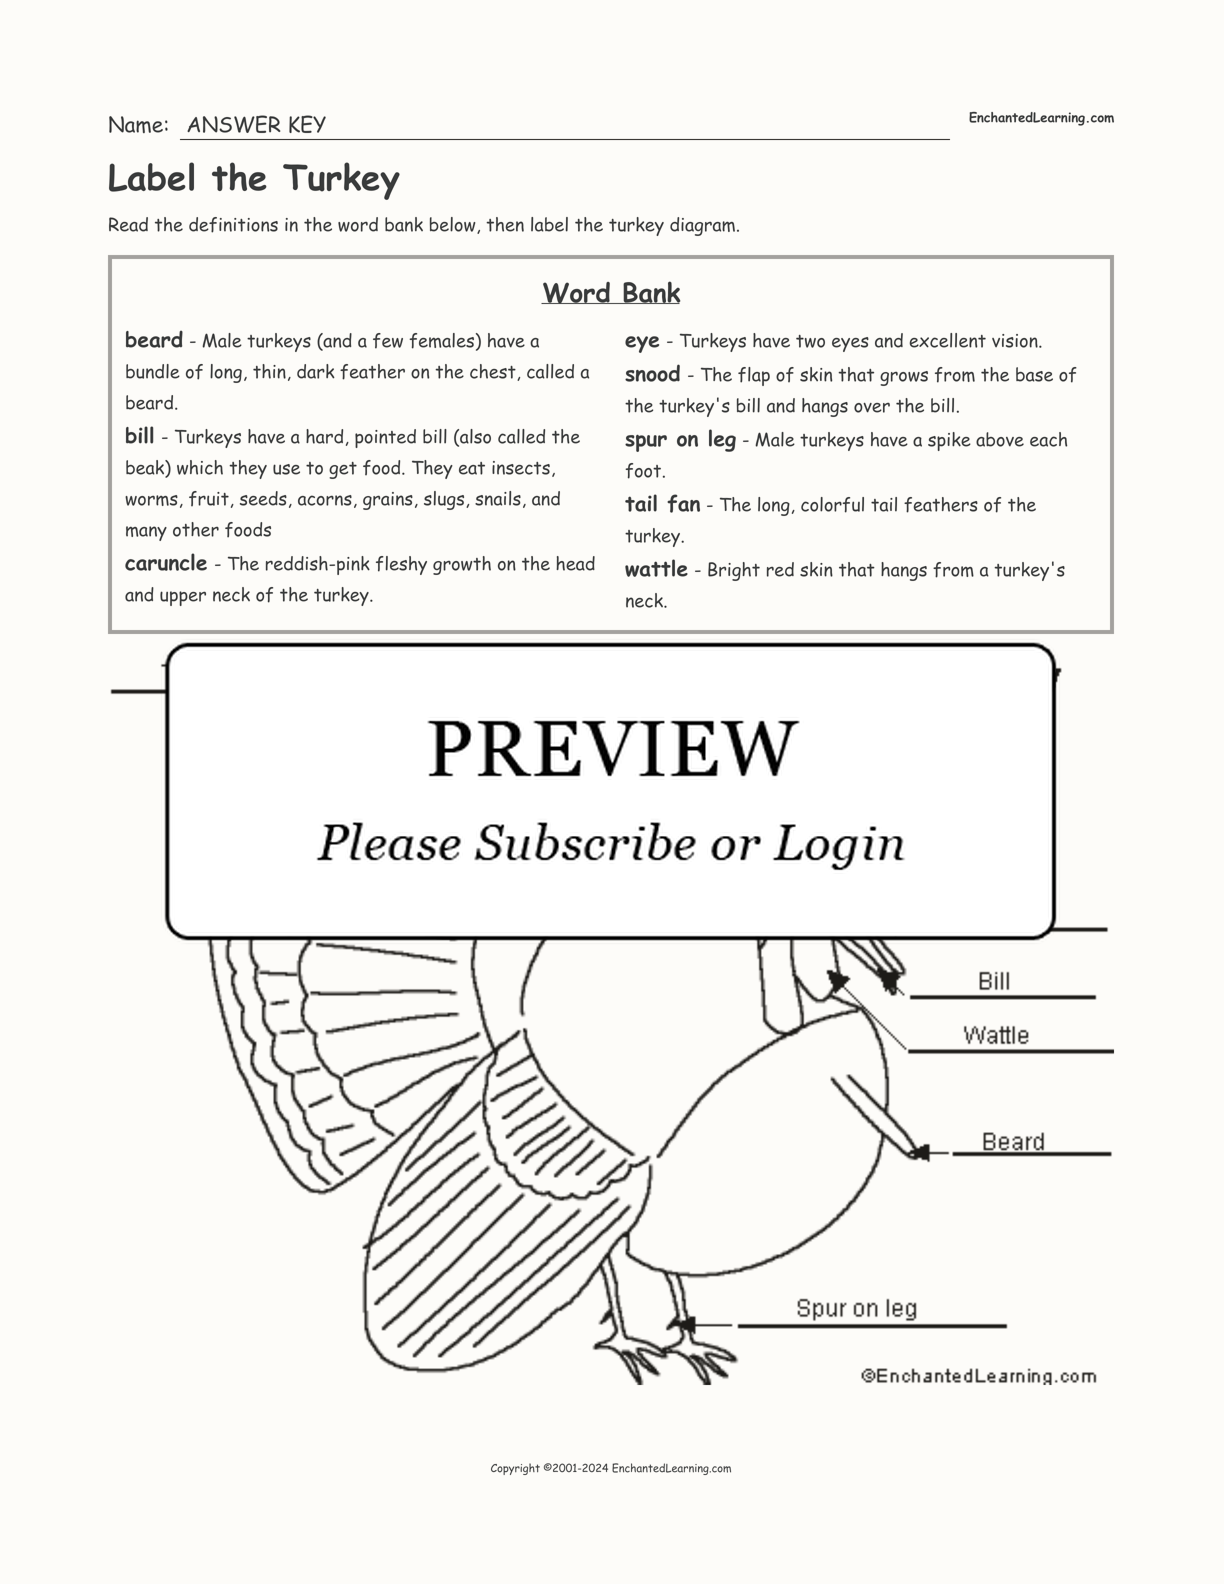 Label the Turkey interactive worksheet page 2